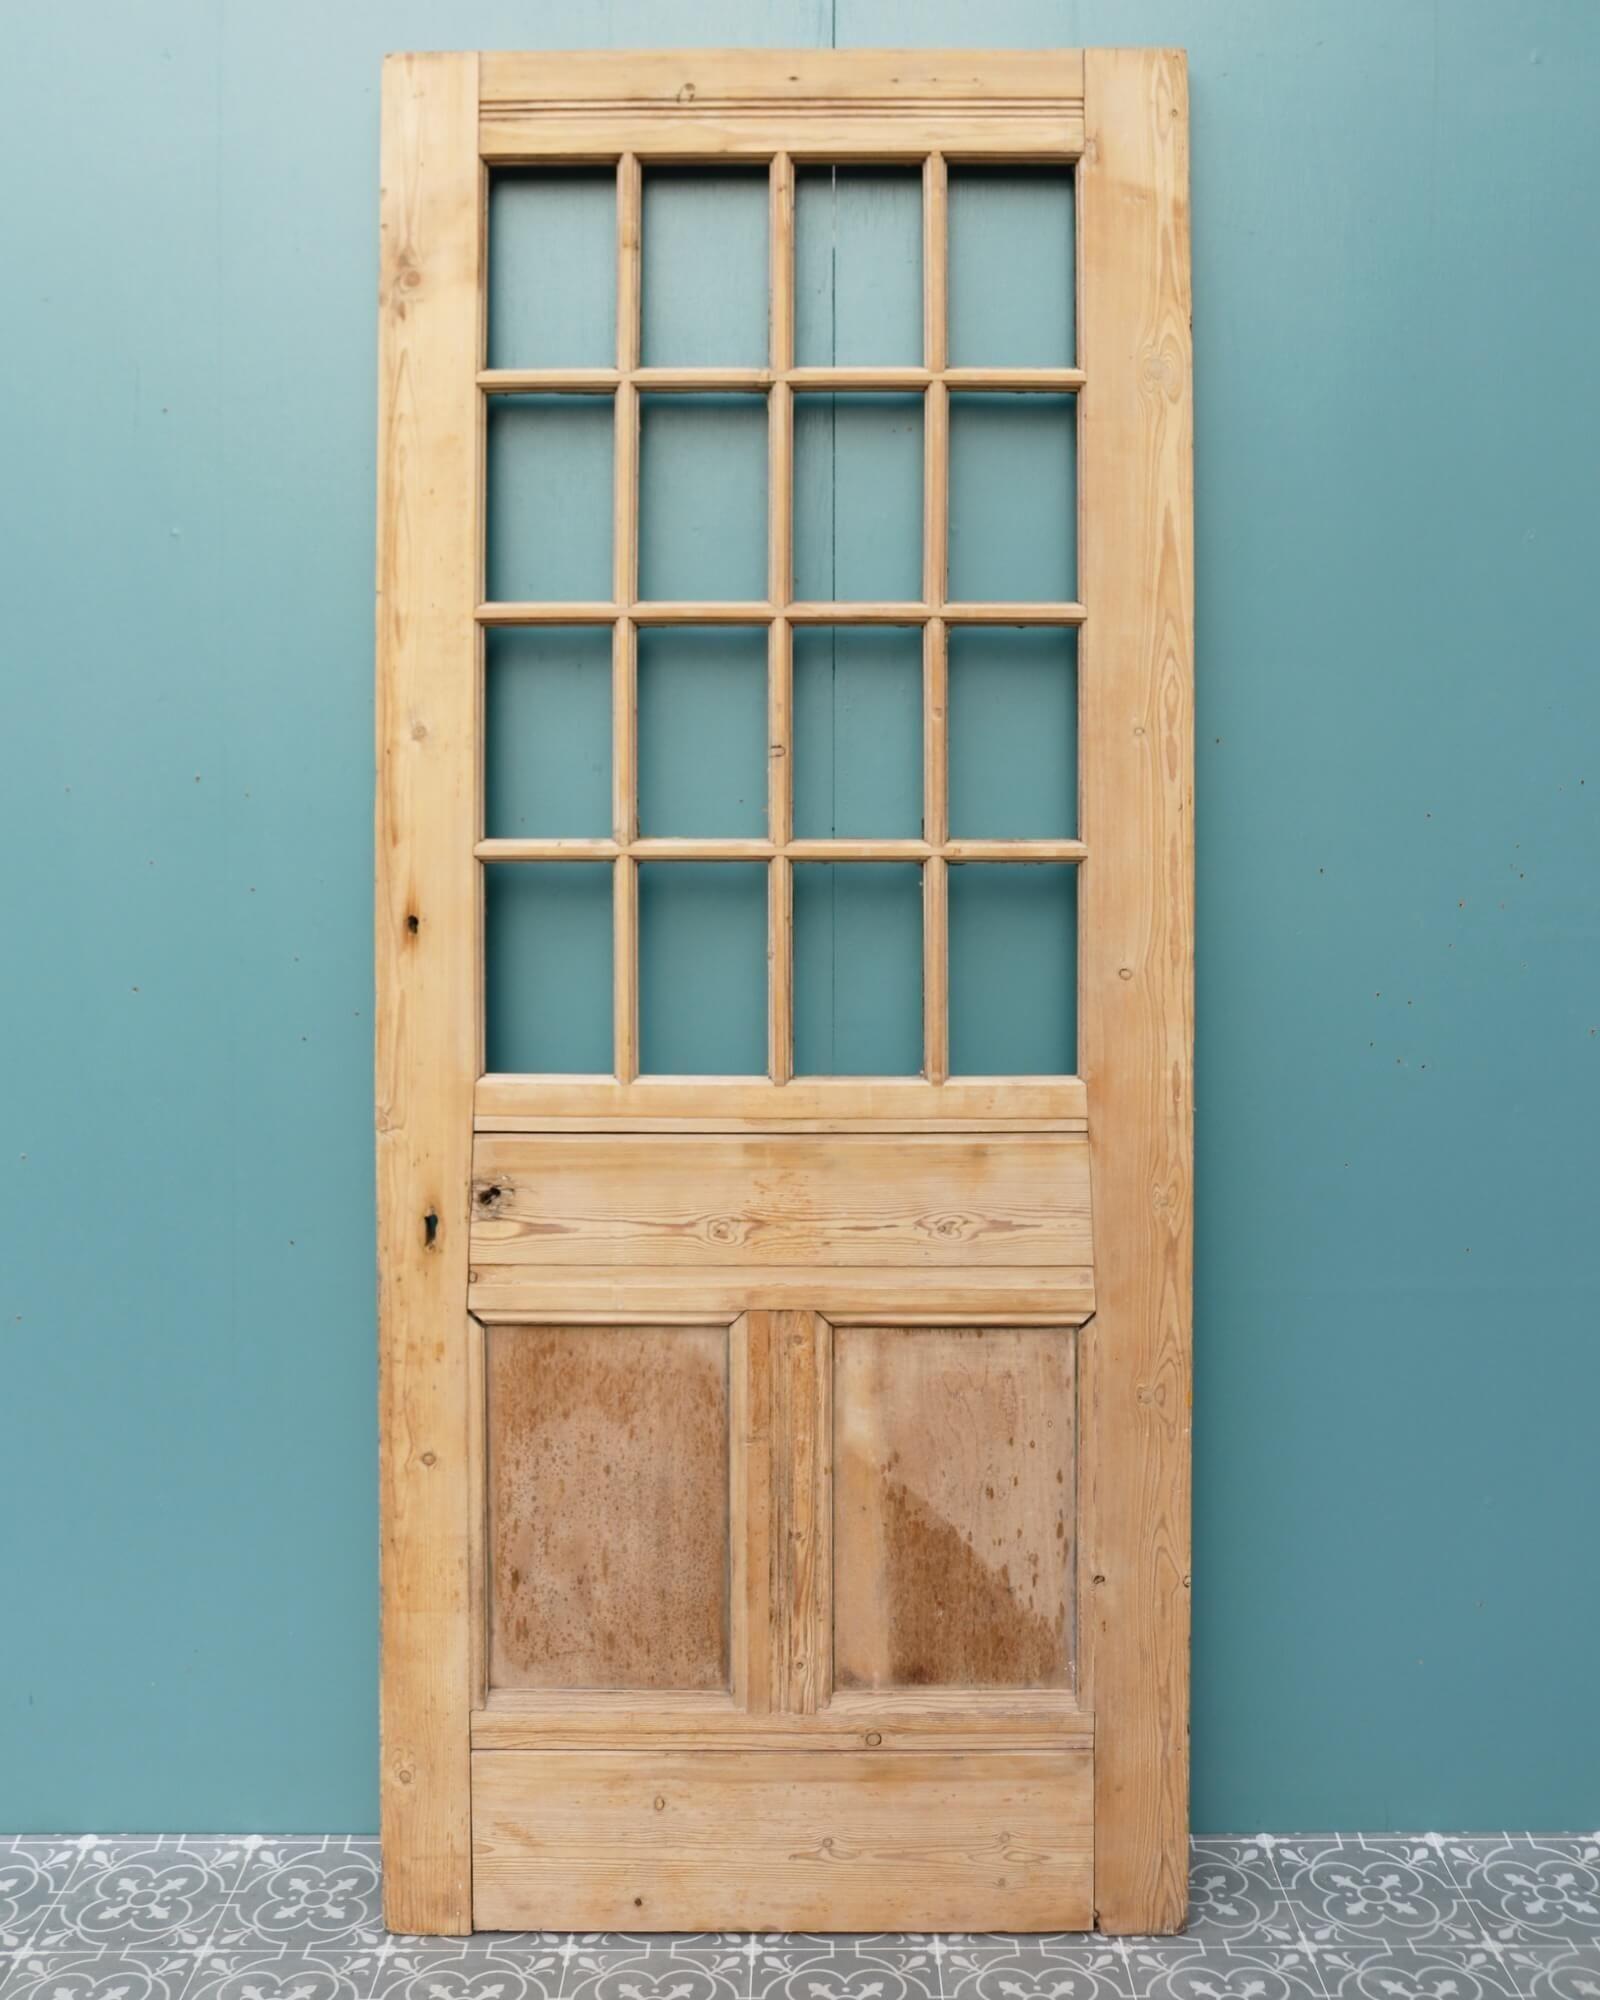 An unglazed, reclaimed Victorian front door circa 1890, stripped and sanded and ready for finishing in stain, wax or paint. Features 2 panel construction at the base to the front and the back below 16 panes for glazing. With the glass fitted and the